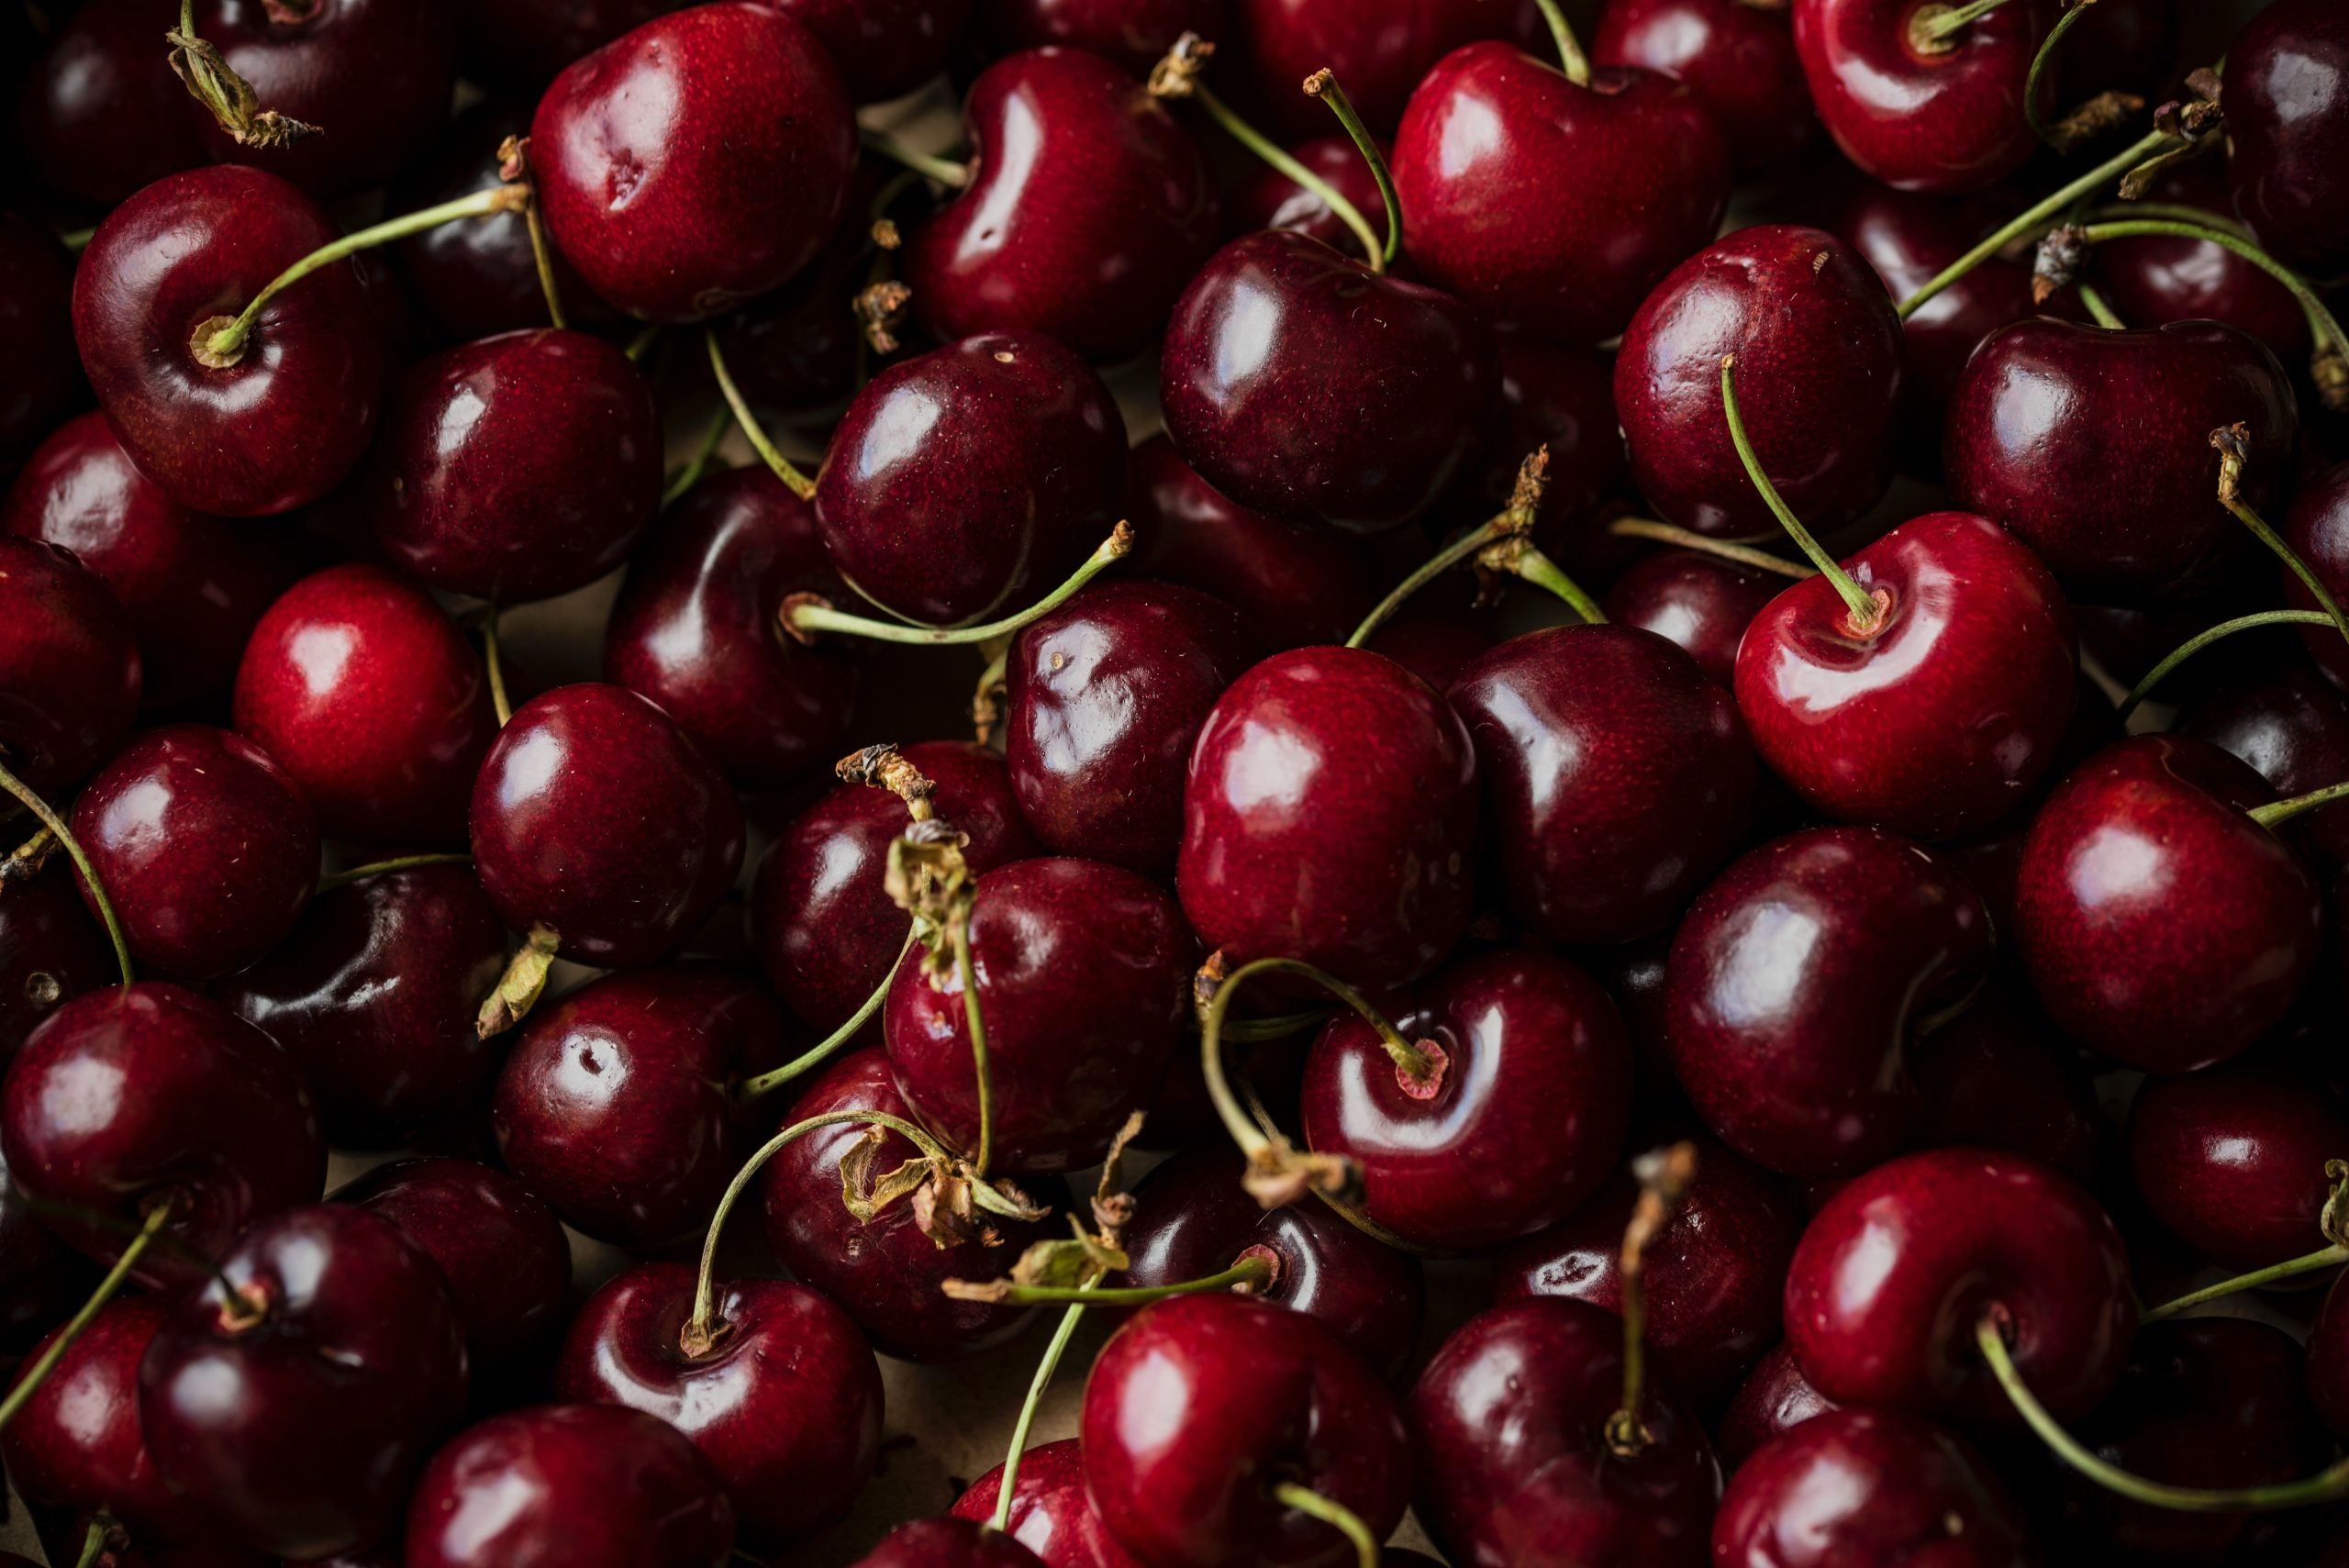 NEWS | Herefordshire supplier thanks Tesco for reducing the price of cherries to avoid waste